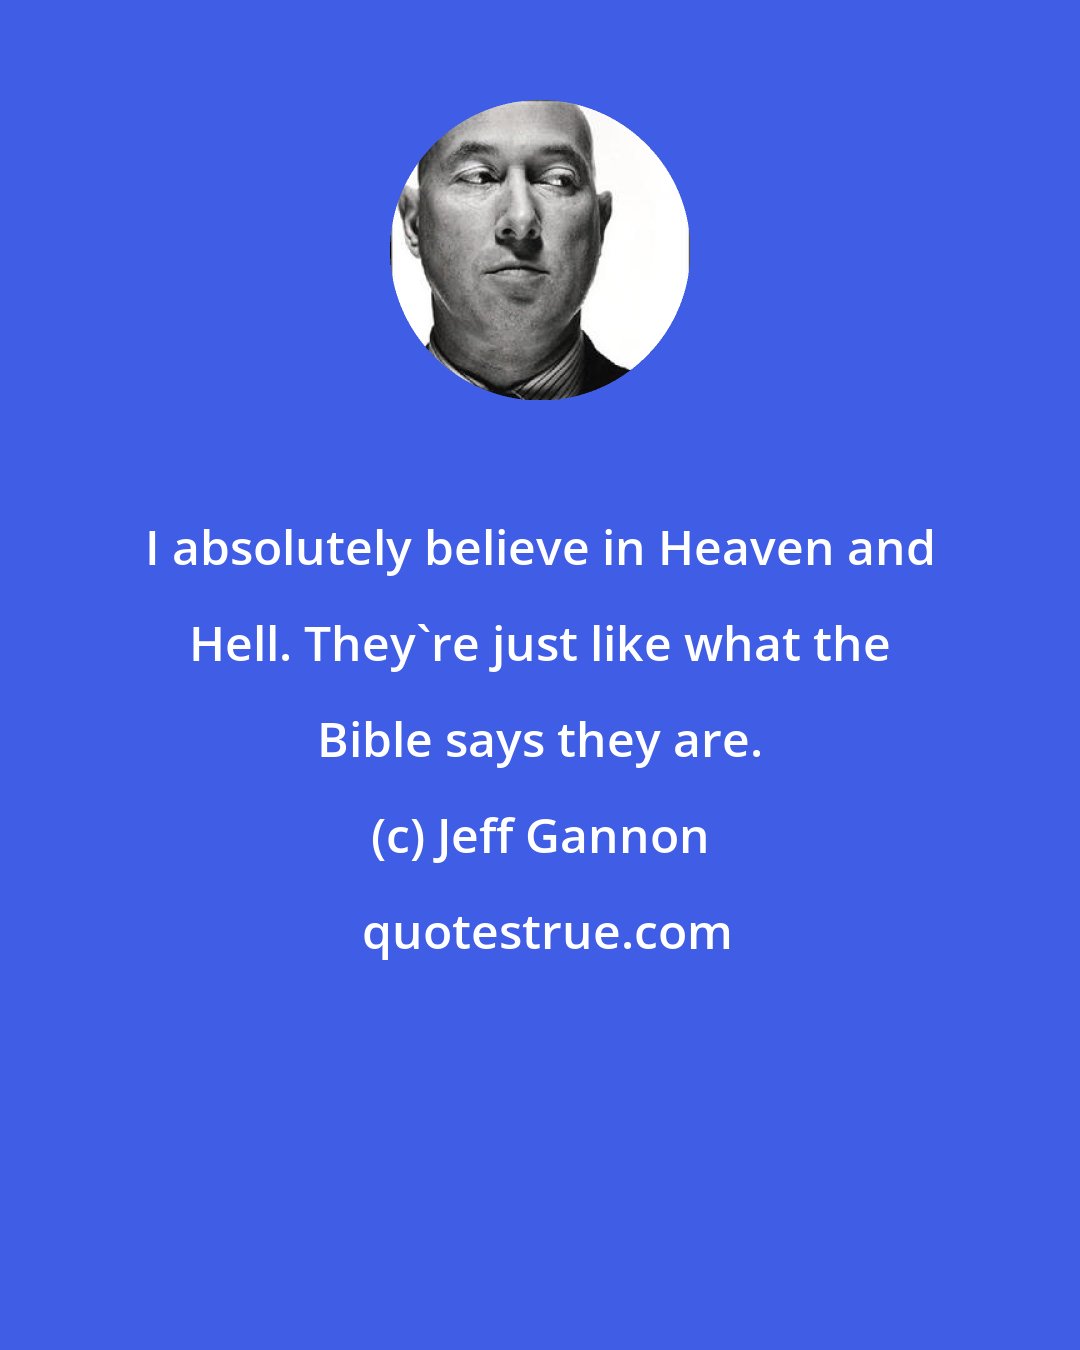 Jeff Gannon: I absolutely believe in Heaven and Hell. They're just like what the Bible says they are.